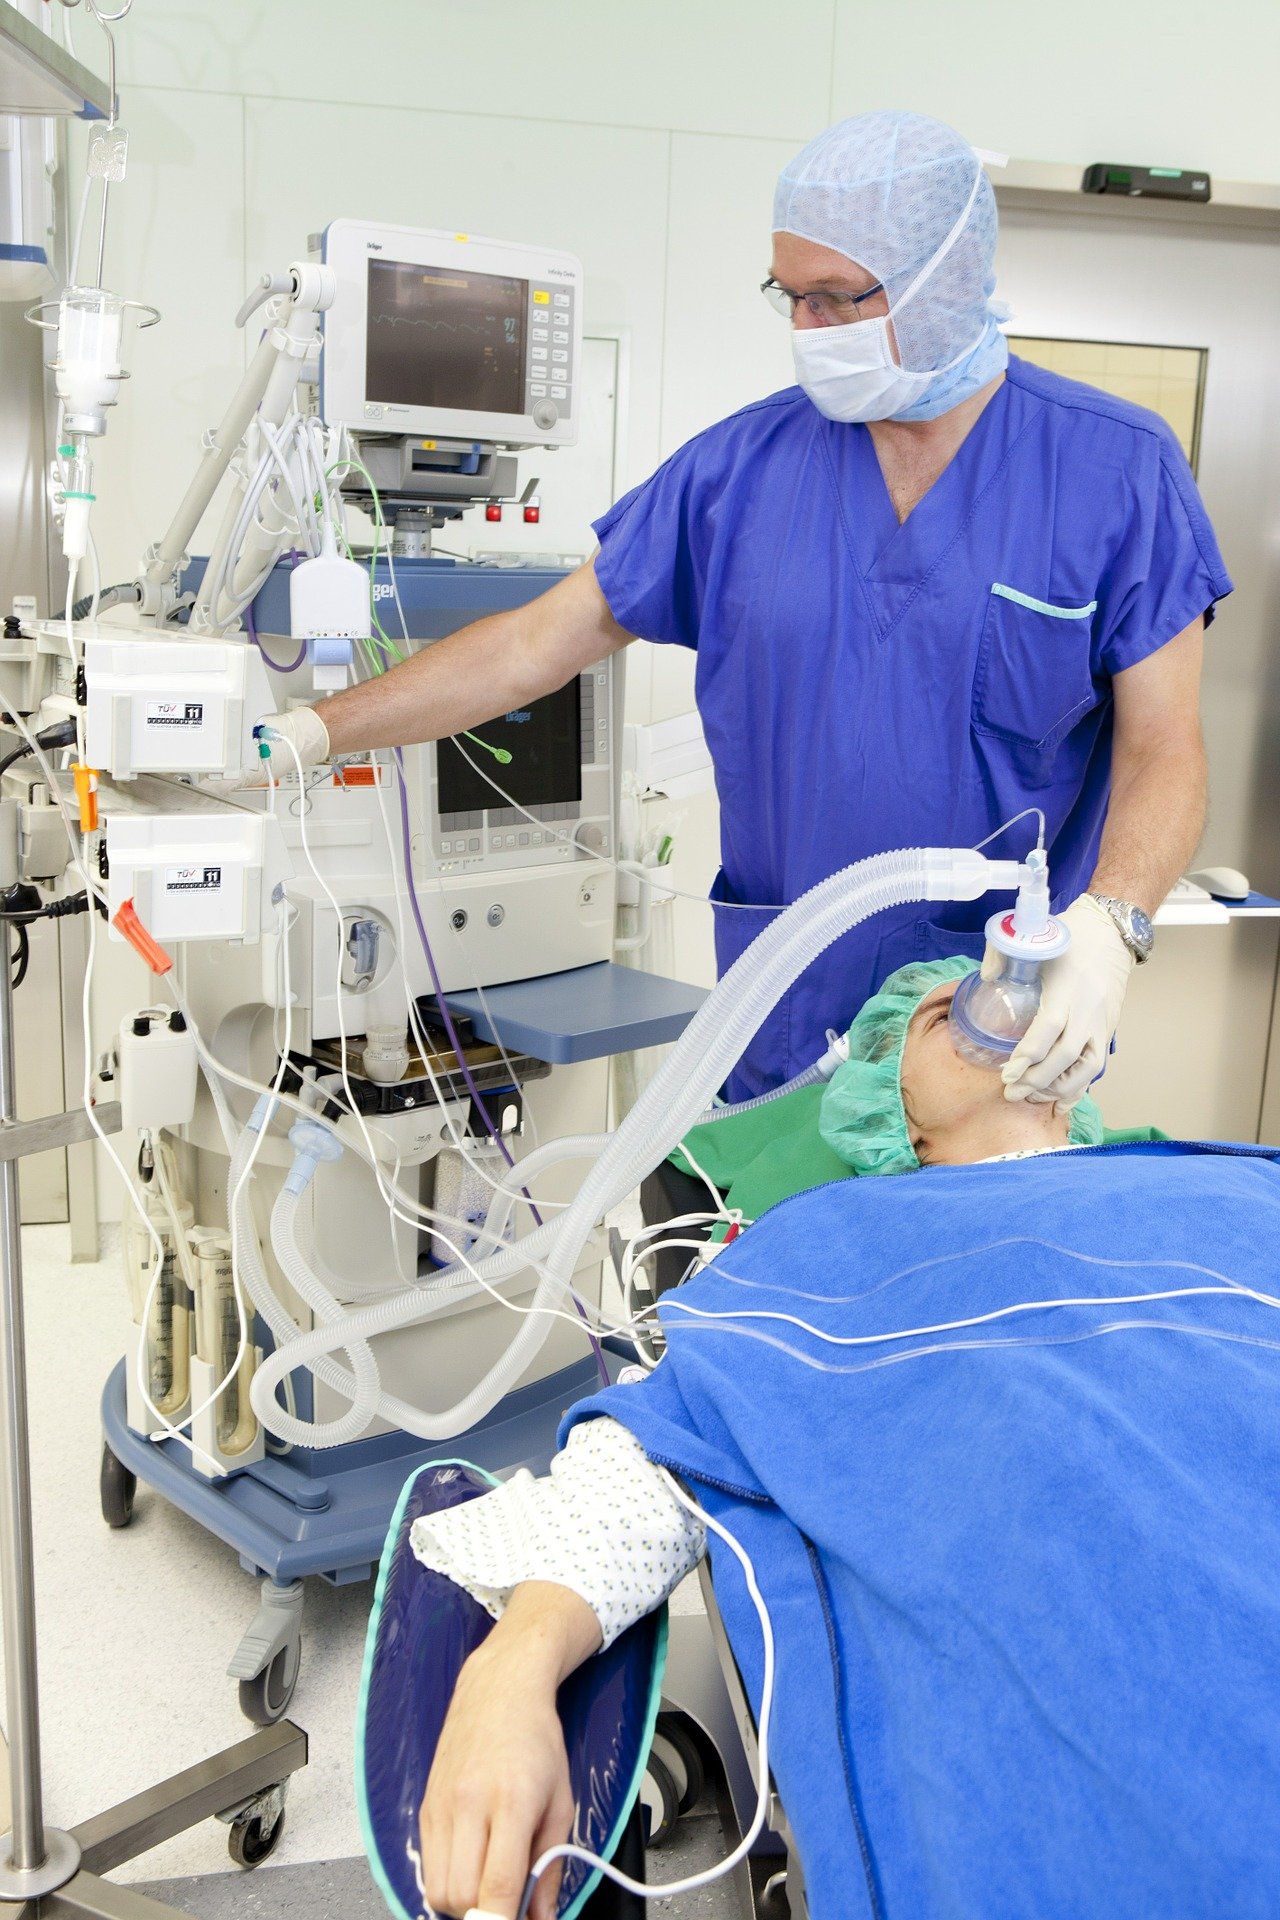 Action needed to avert anesthetist shortage of 11,000 by 2040, which could affect over 8 million operations